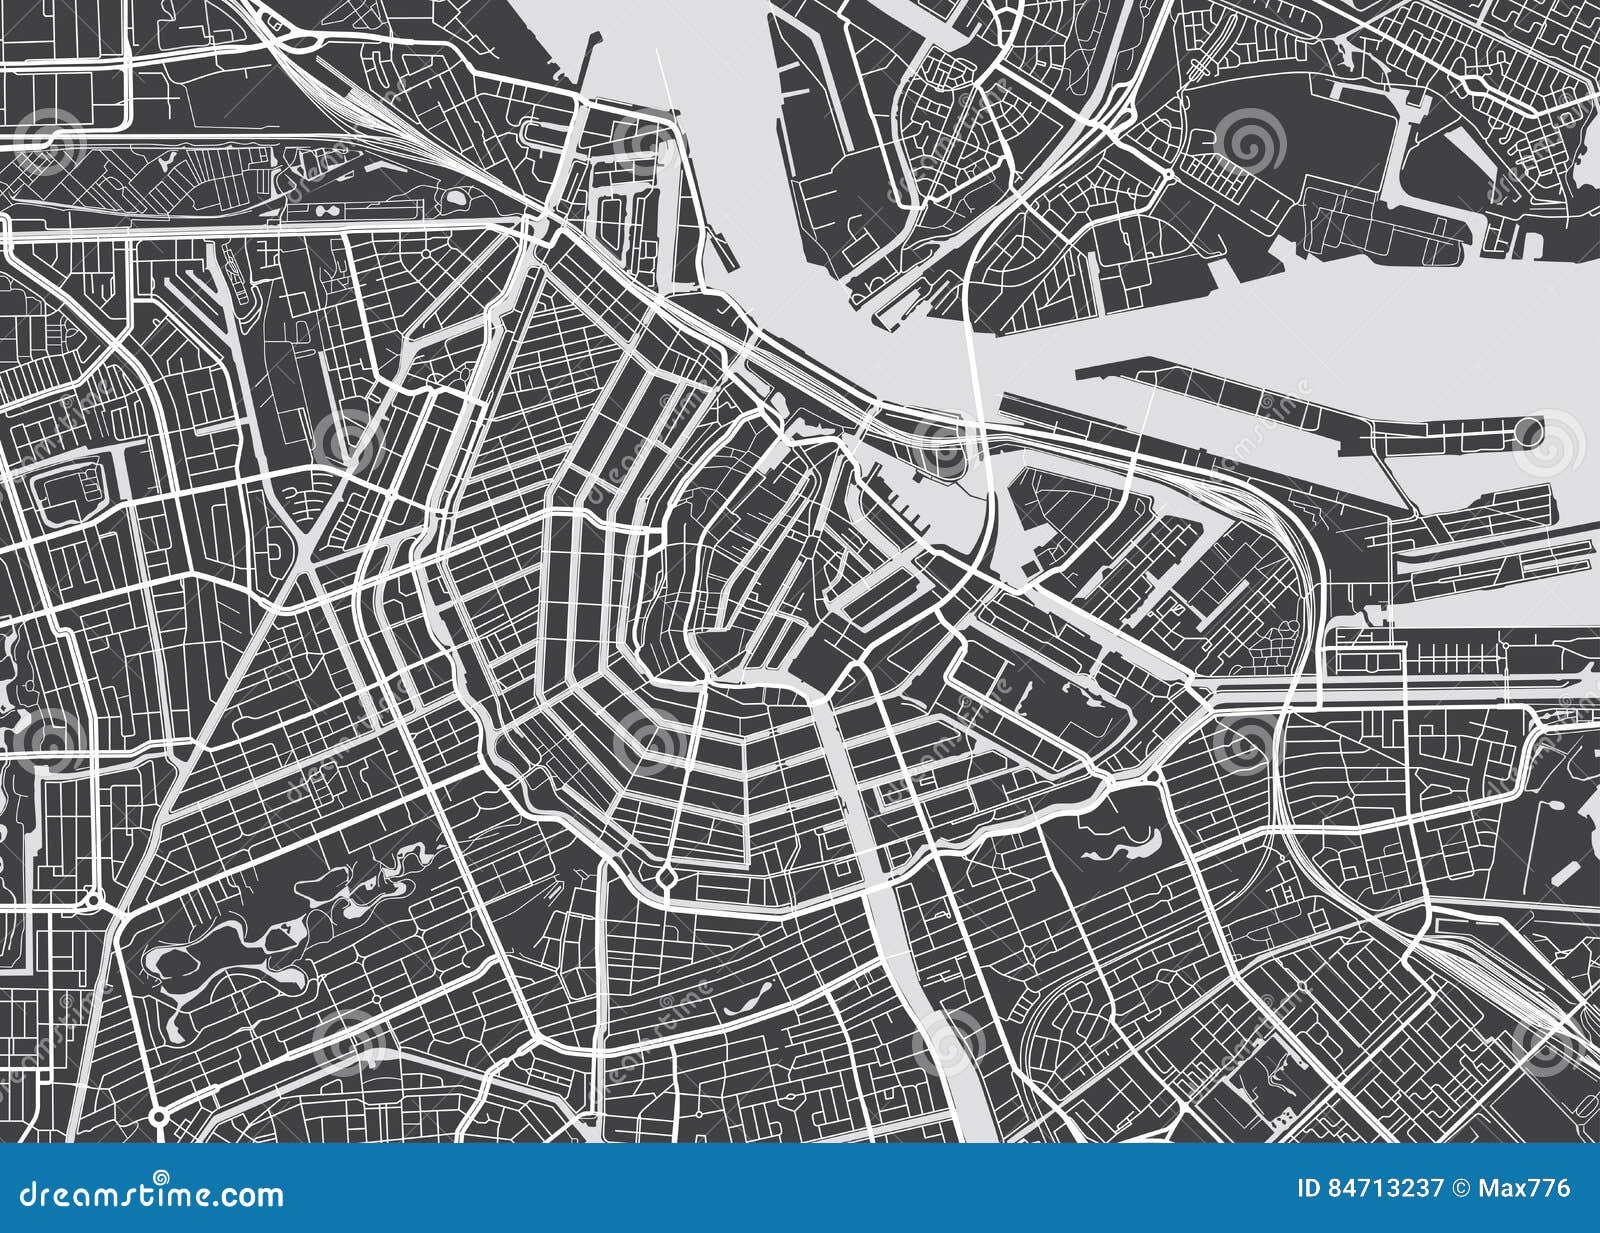  detailed map amsterdam